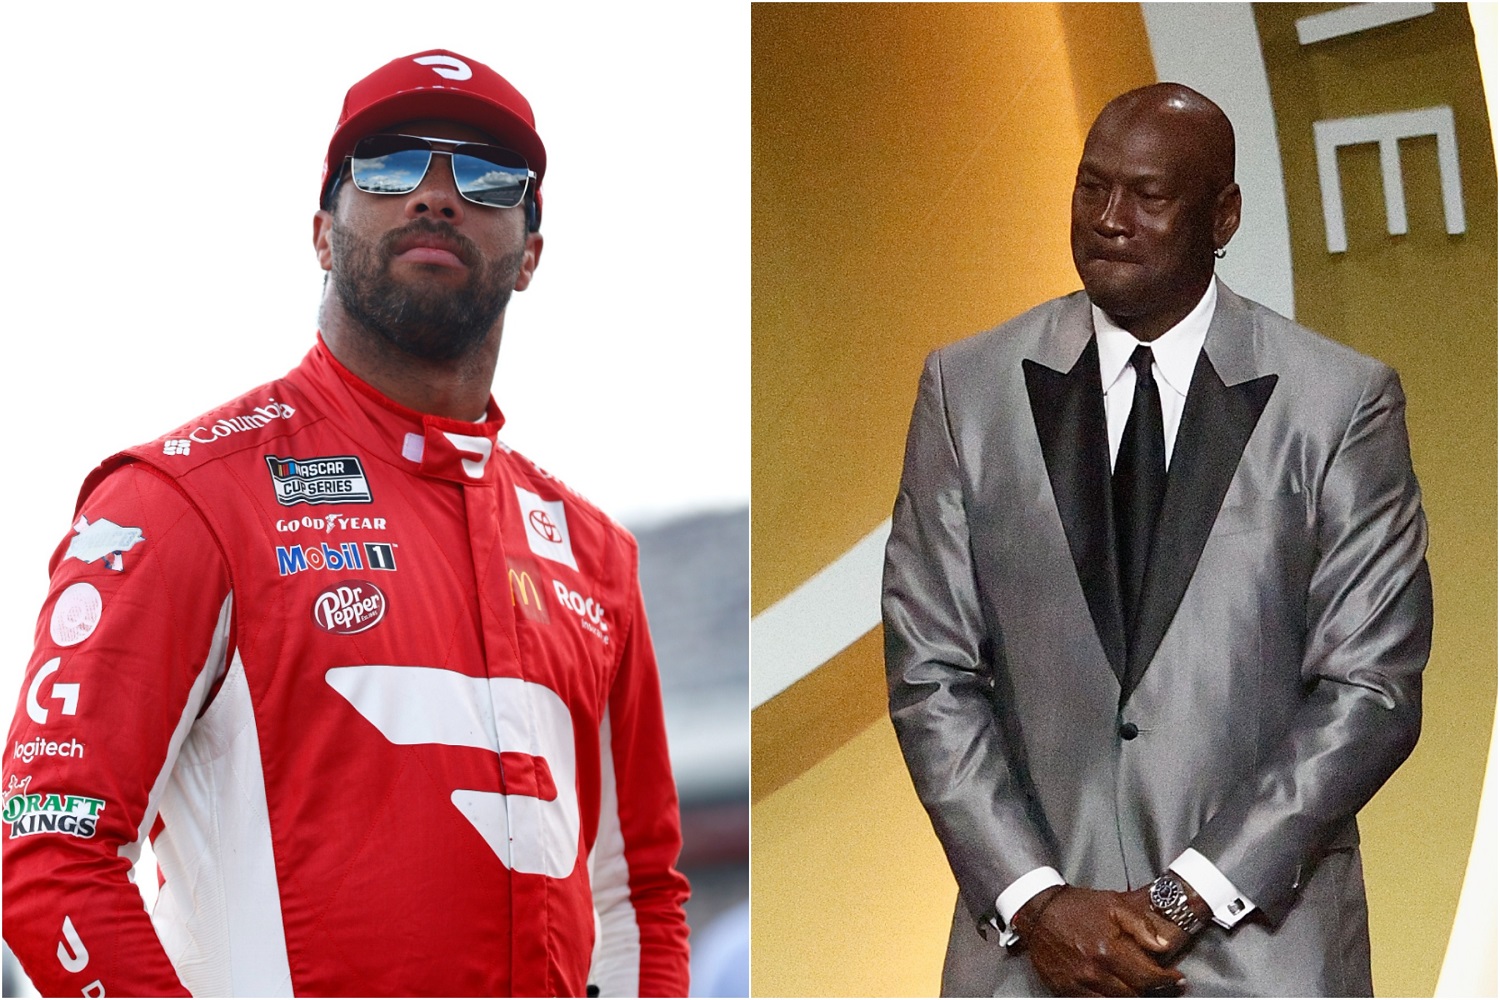 Fifth-year NSACAR Cup Series driver Bubba Wallace and 23XI Racing owner Michael Jordan. | Getty Images